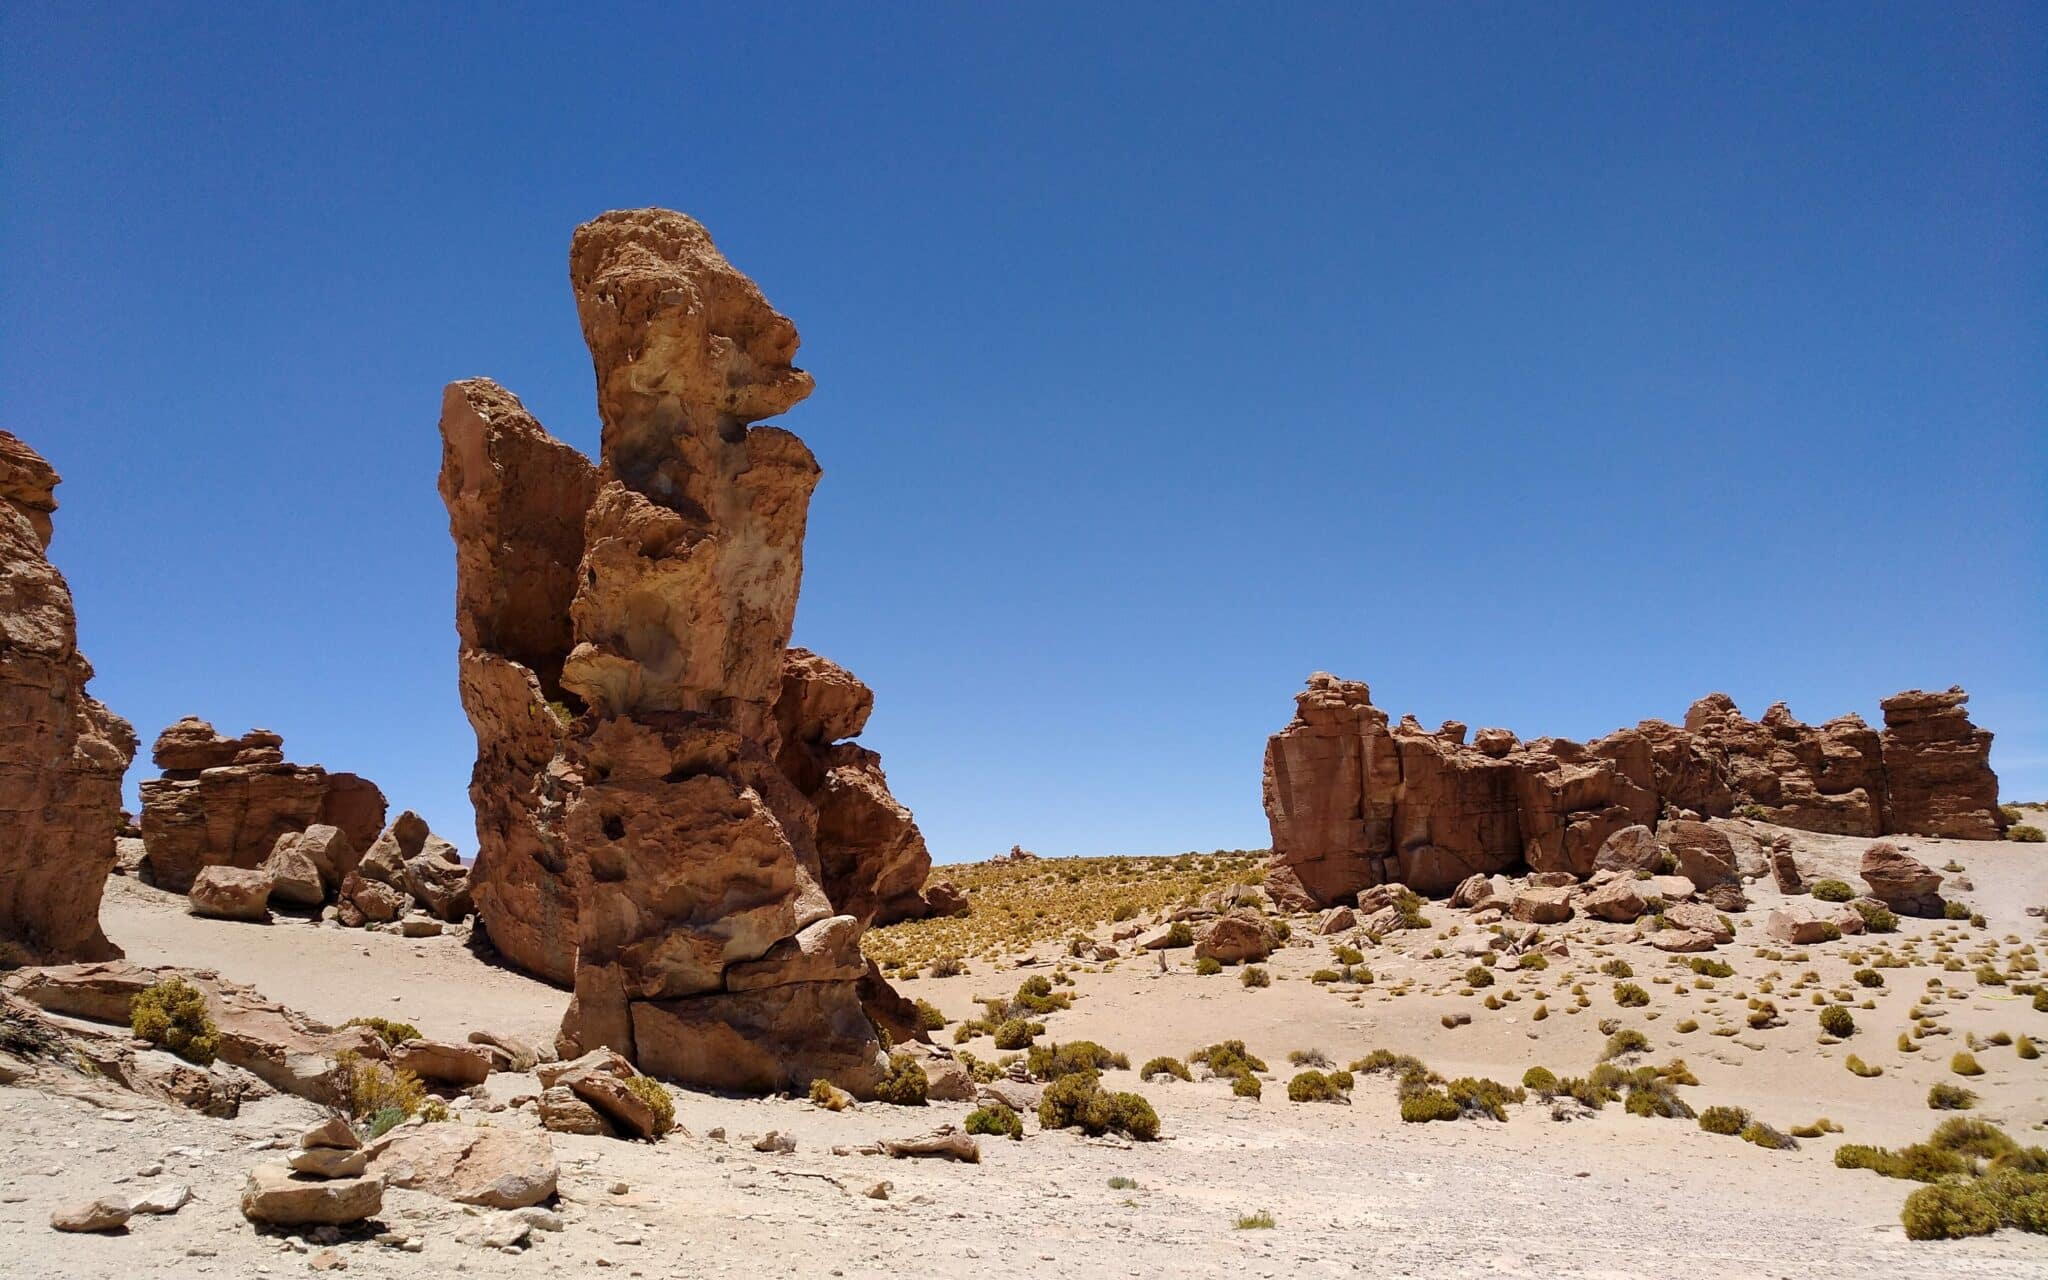 Meter-high rock formations, which have a special shape.